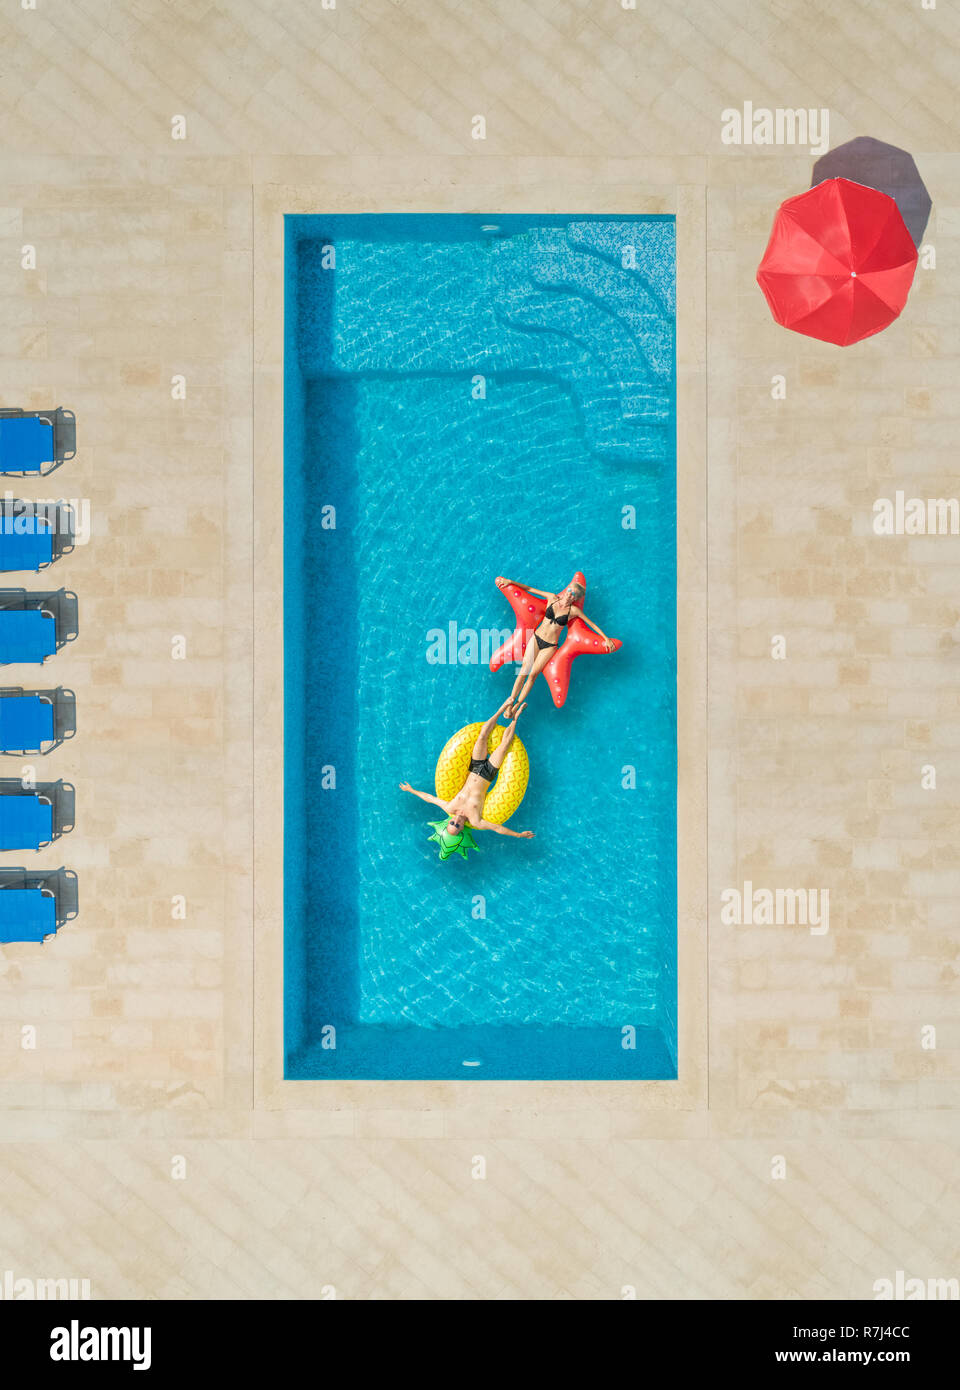 Aerial view of woman and a man on inflatable mattress in swimming pool surrounded by deck chairs and parasol. Stock Photo